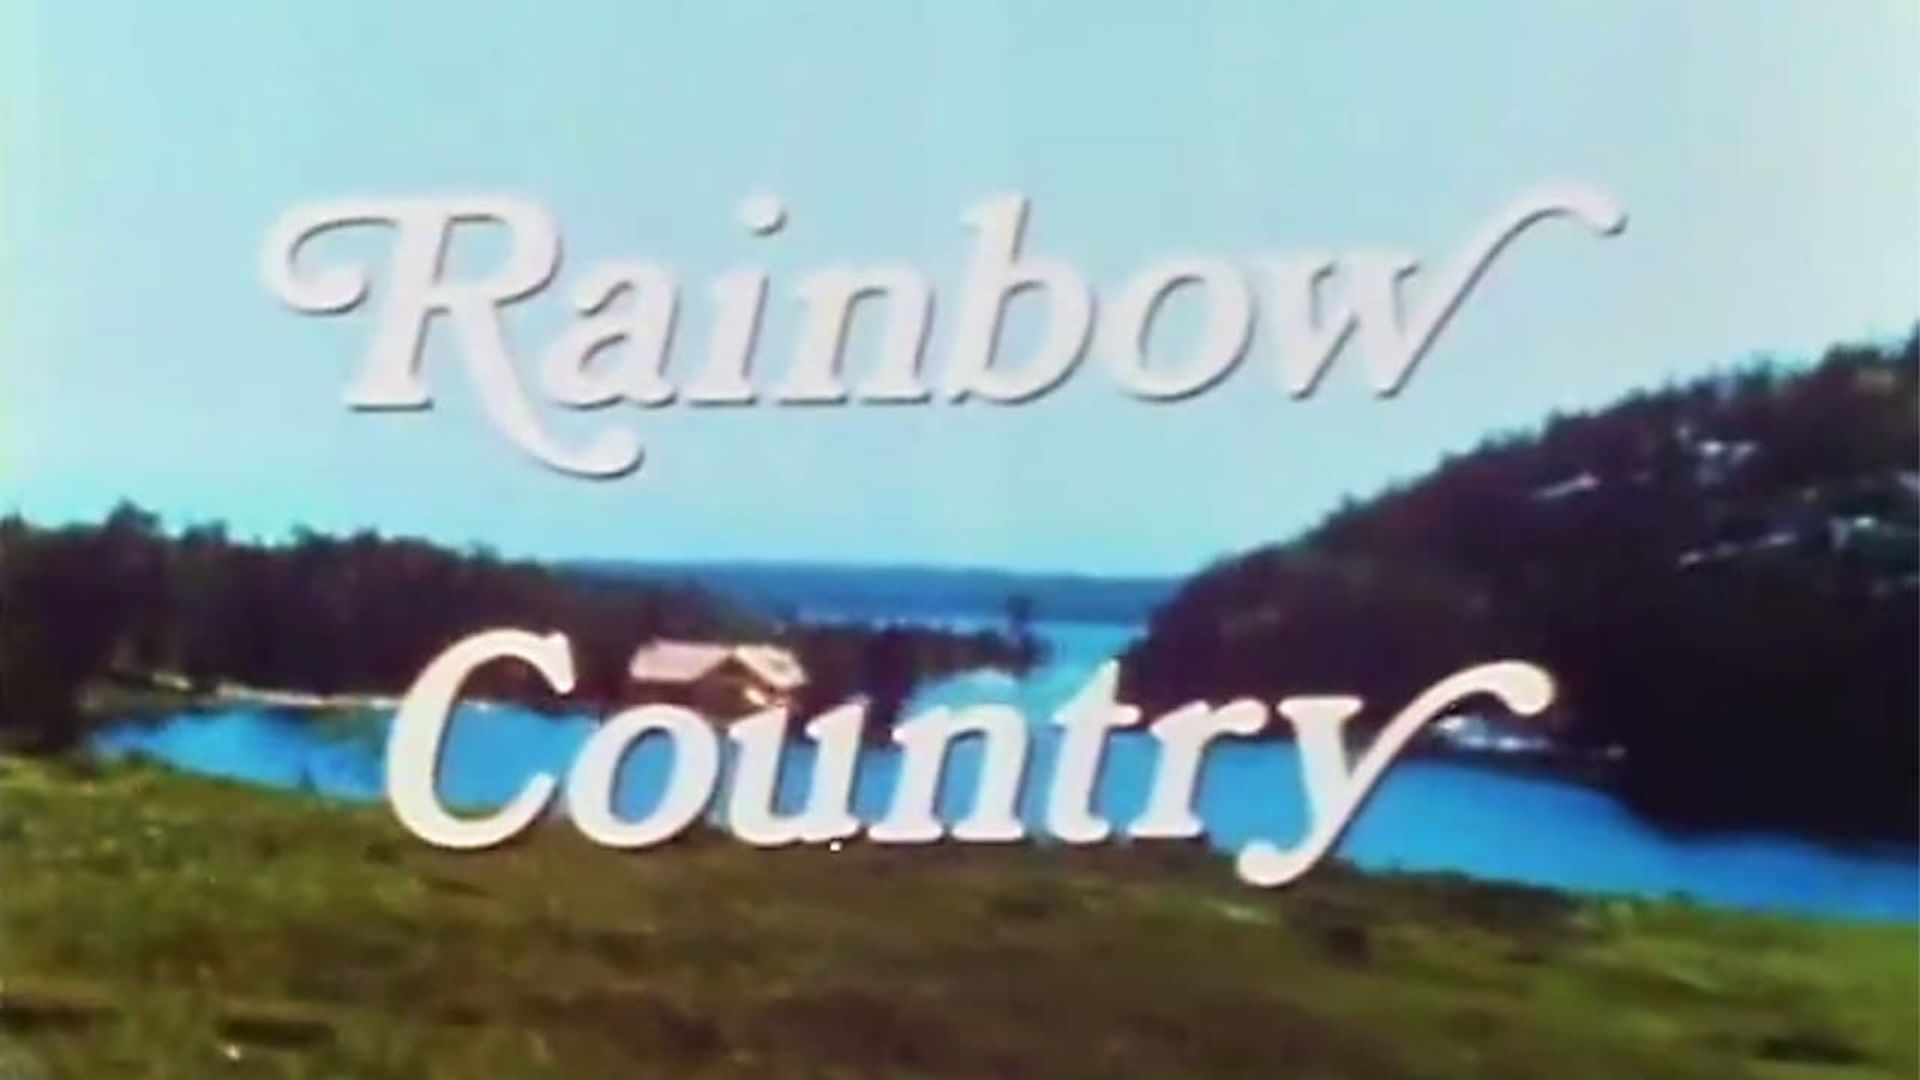 Adventures in Rainbow Country background